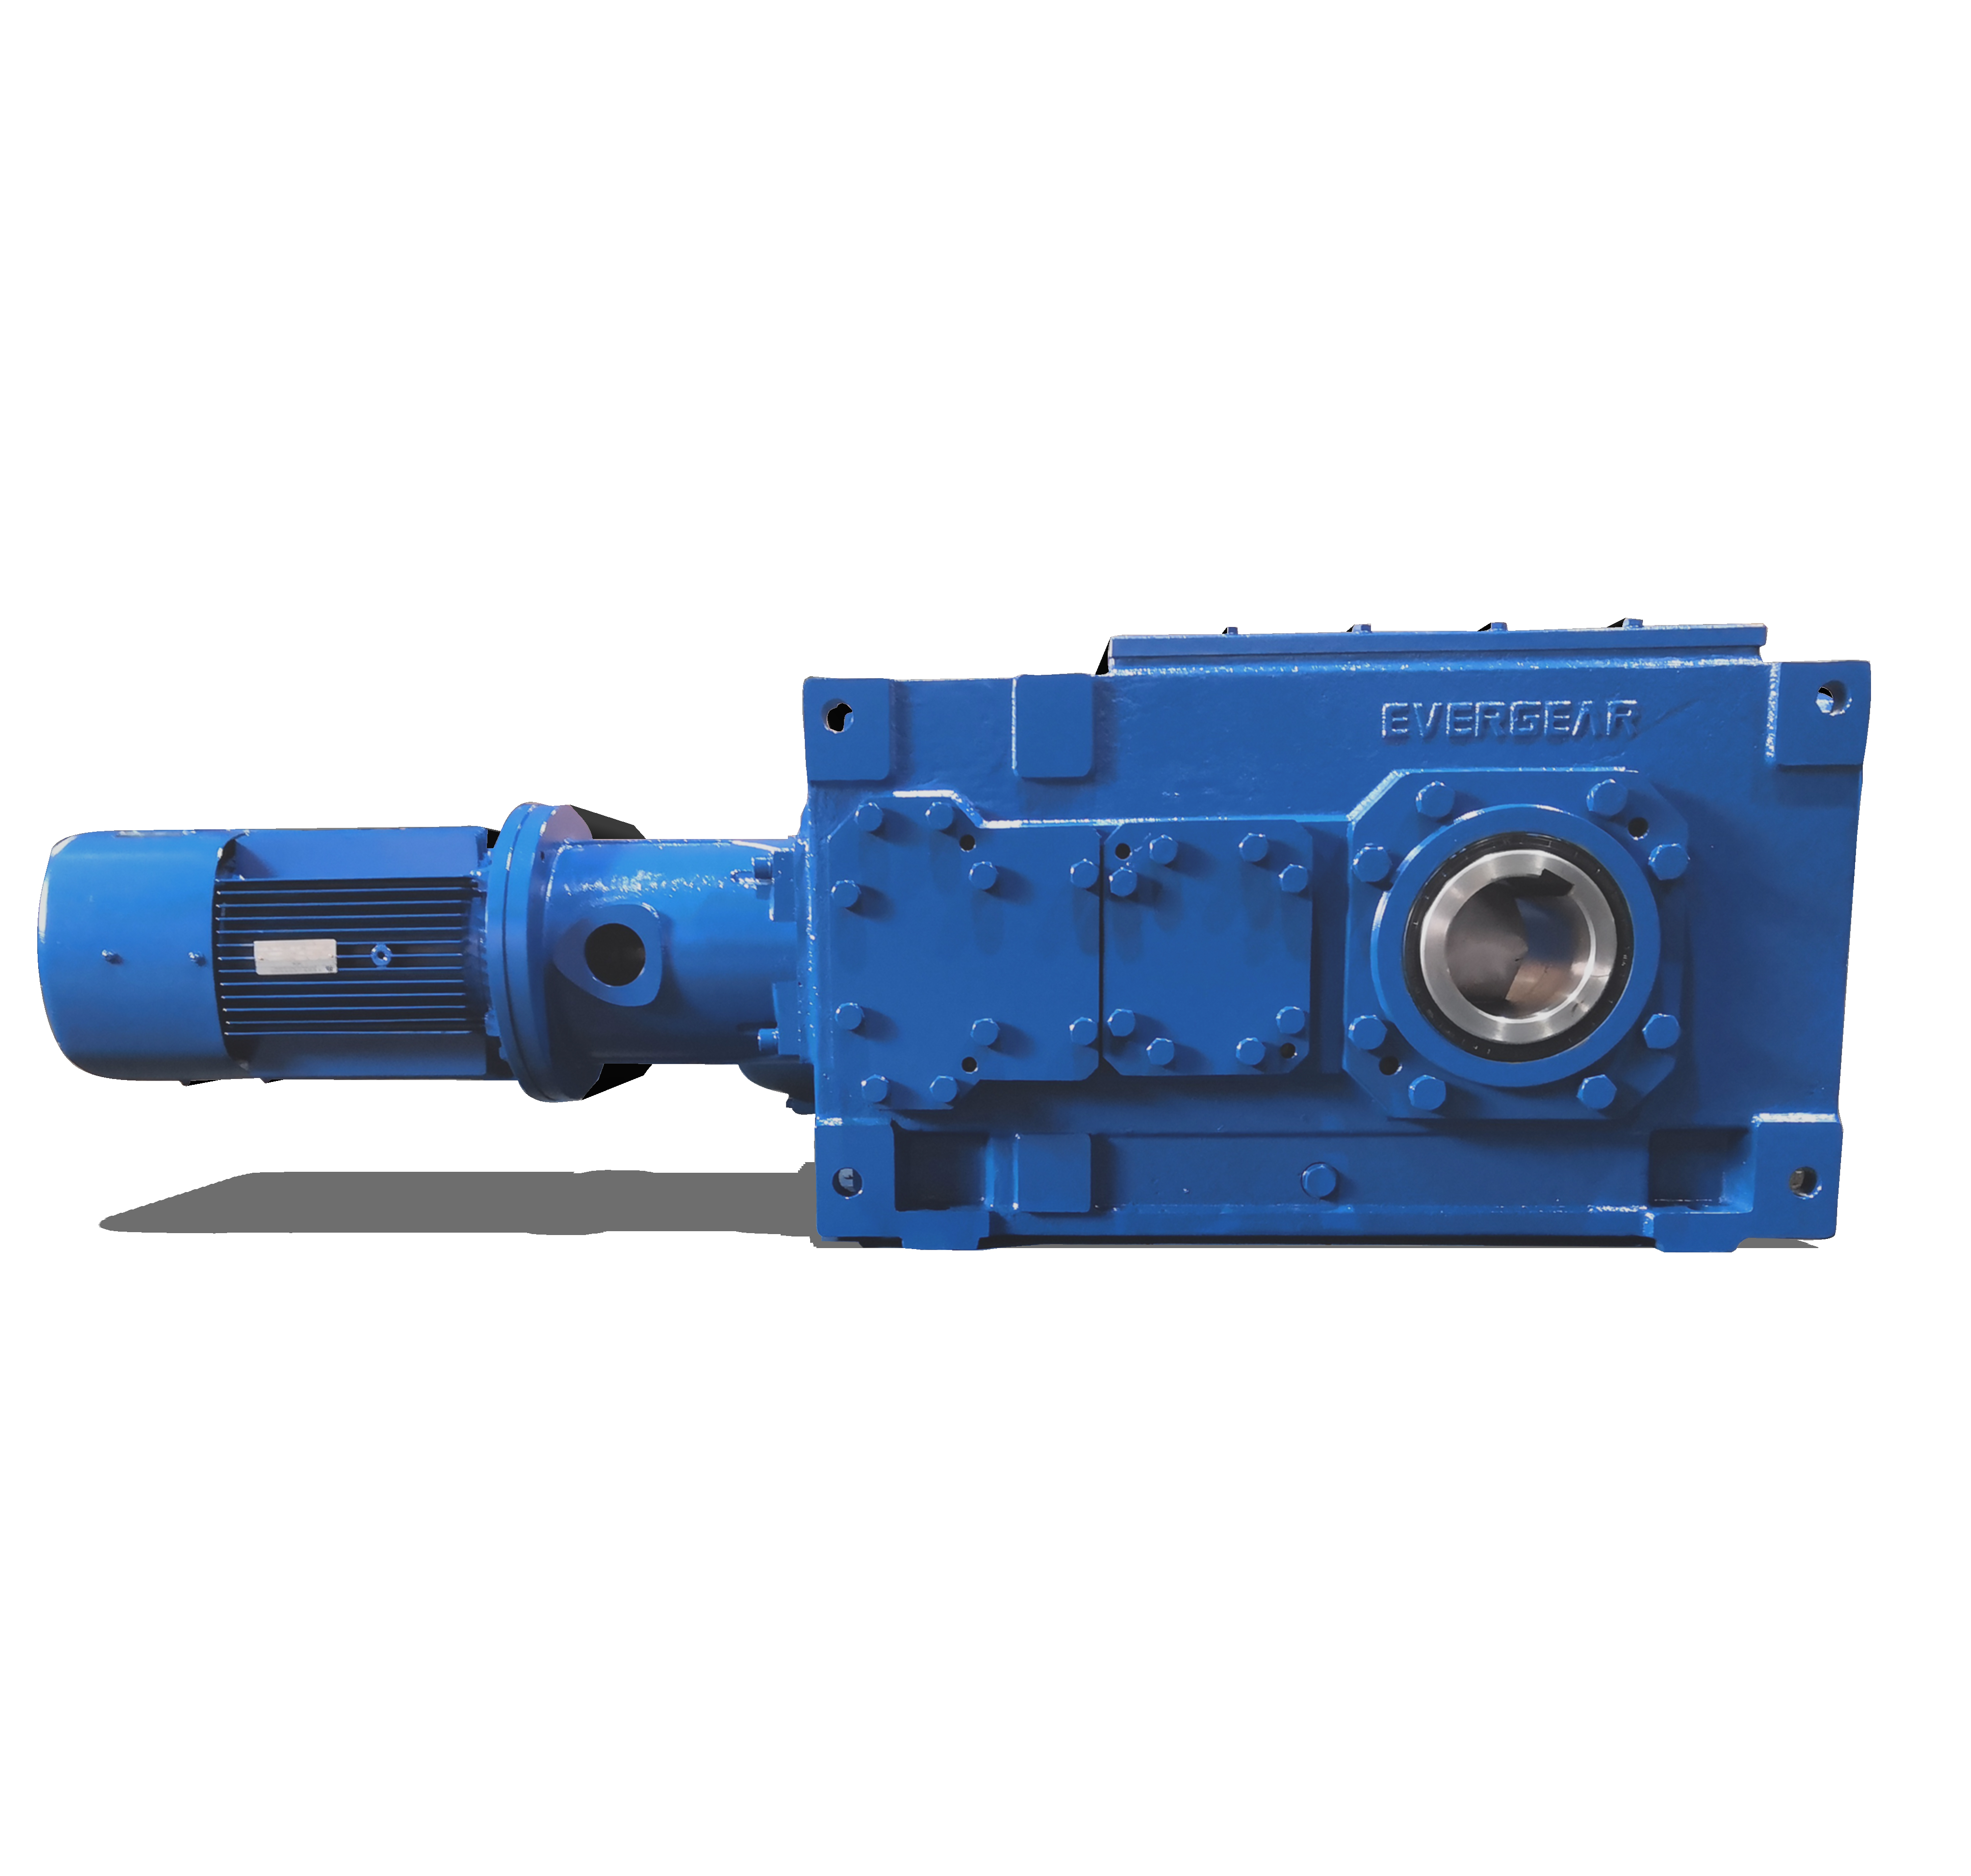 Flender-like GEARBOX FOR Capstand/windlass EVERGEAR H/B Series Parallel Shaft helical bevel speed reducer